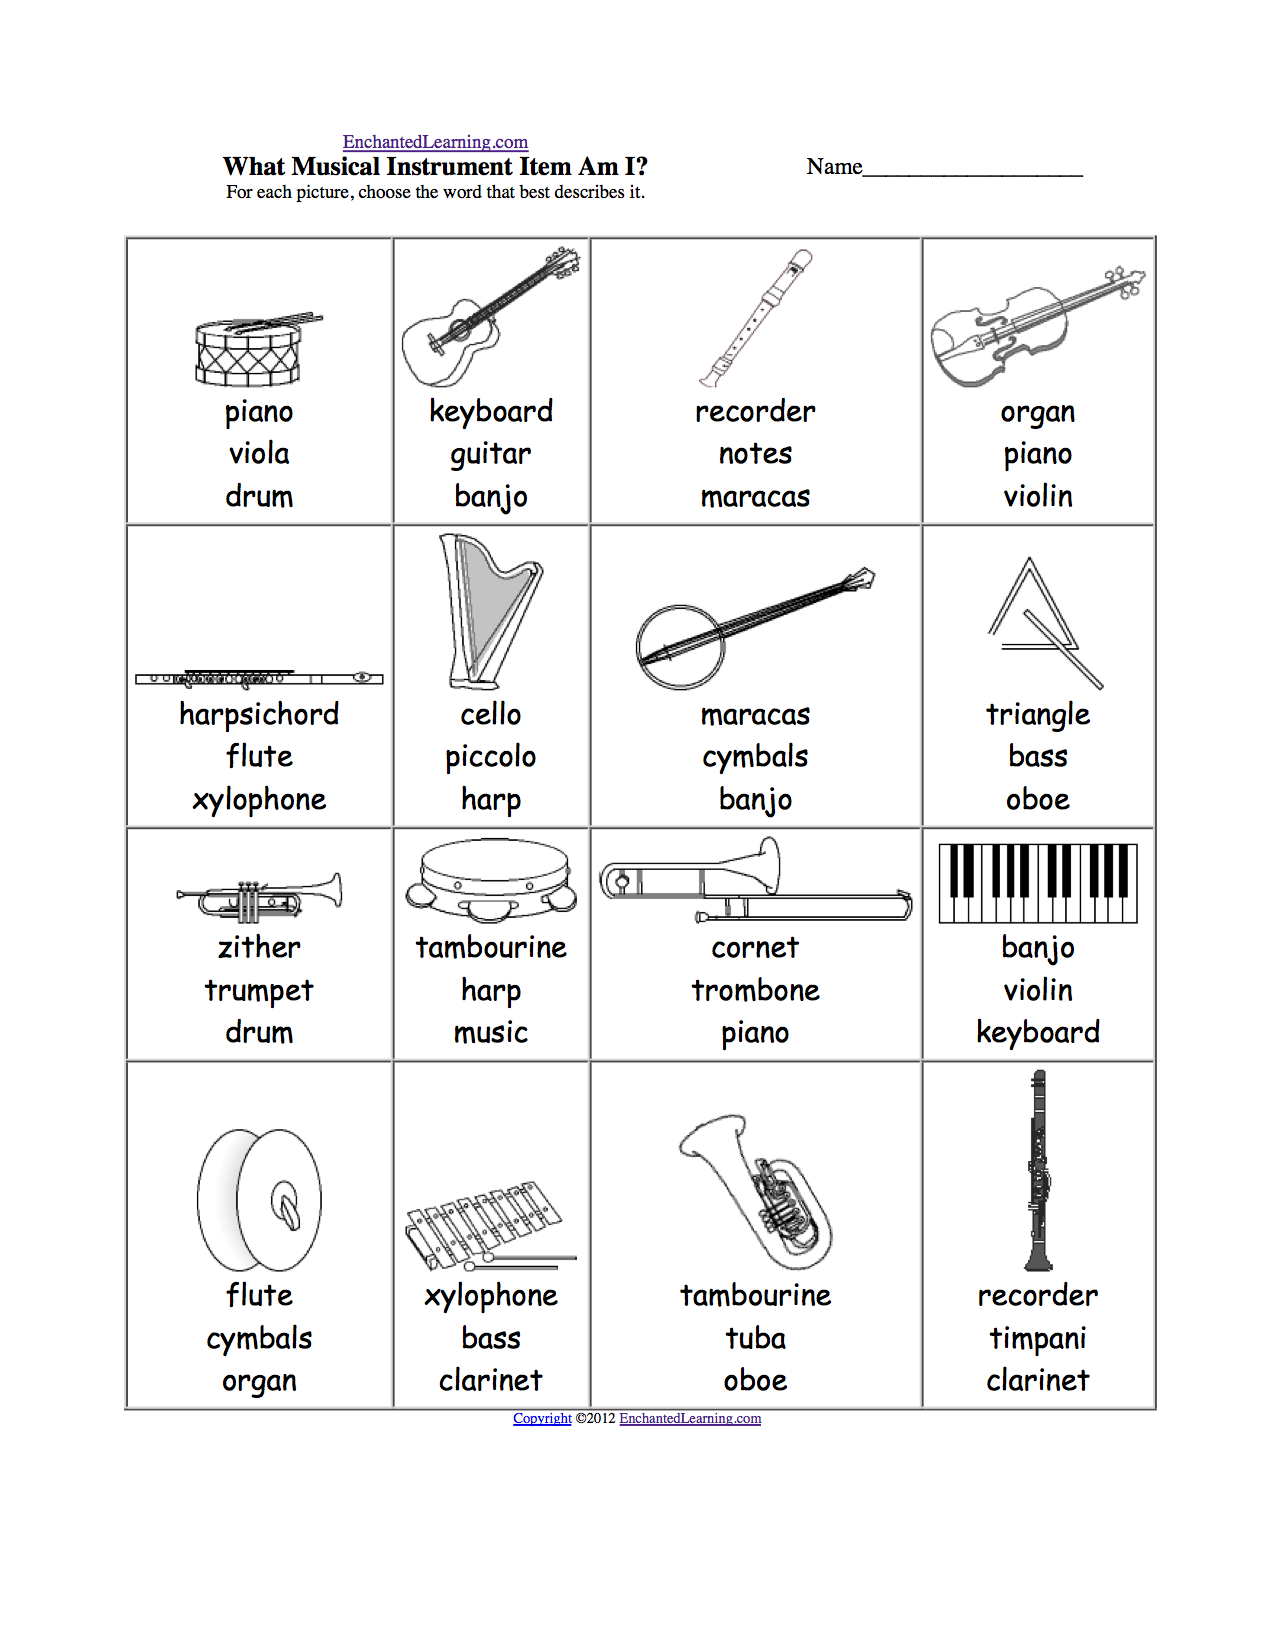 free-music-instruments-names-download-free-music-instruments-names-png